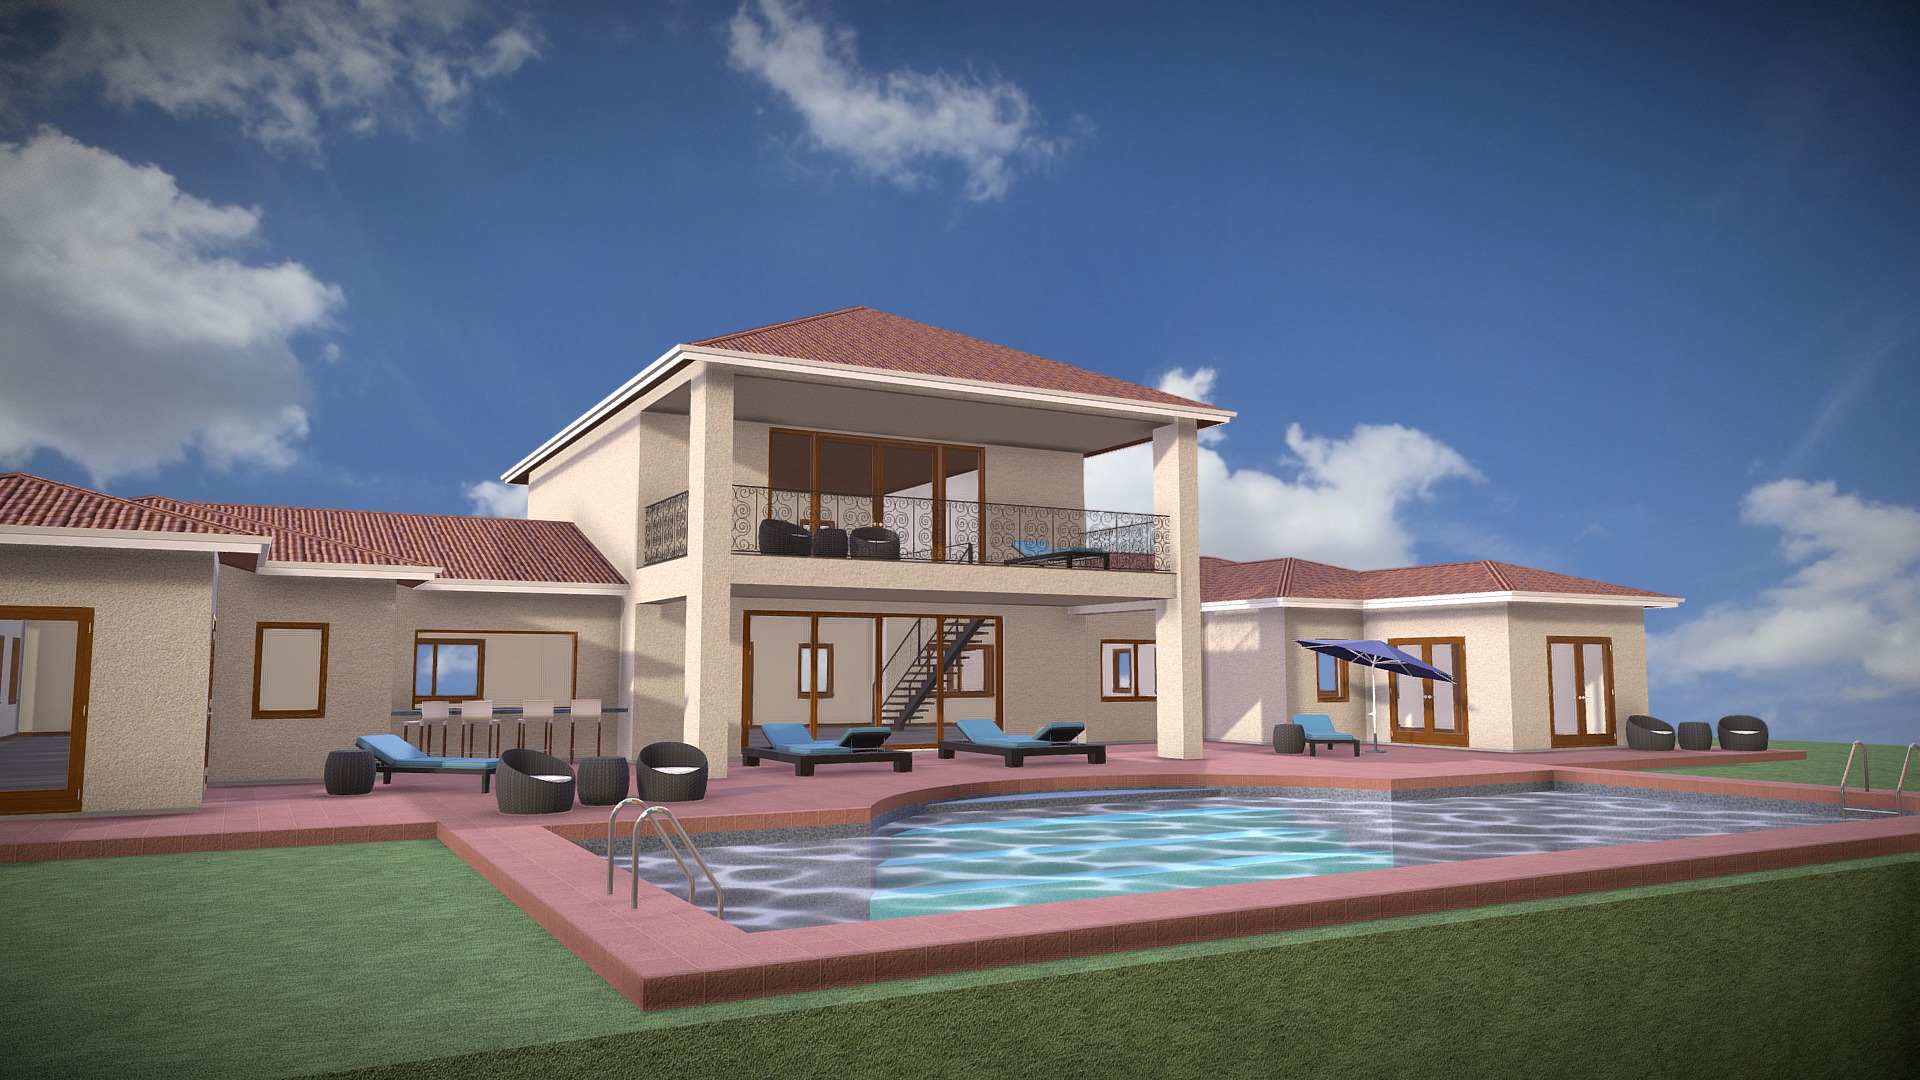 3D model Costa Rican Estate - This is a 3D model of the Costa Rican Estate. The 3D model is about a house with a swimming pool.